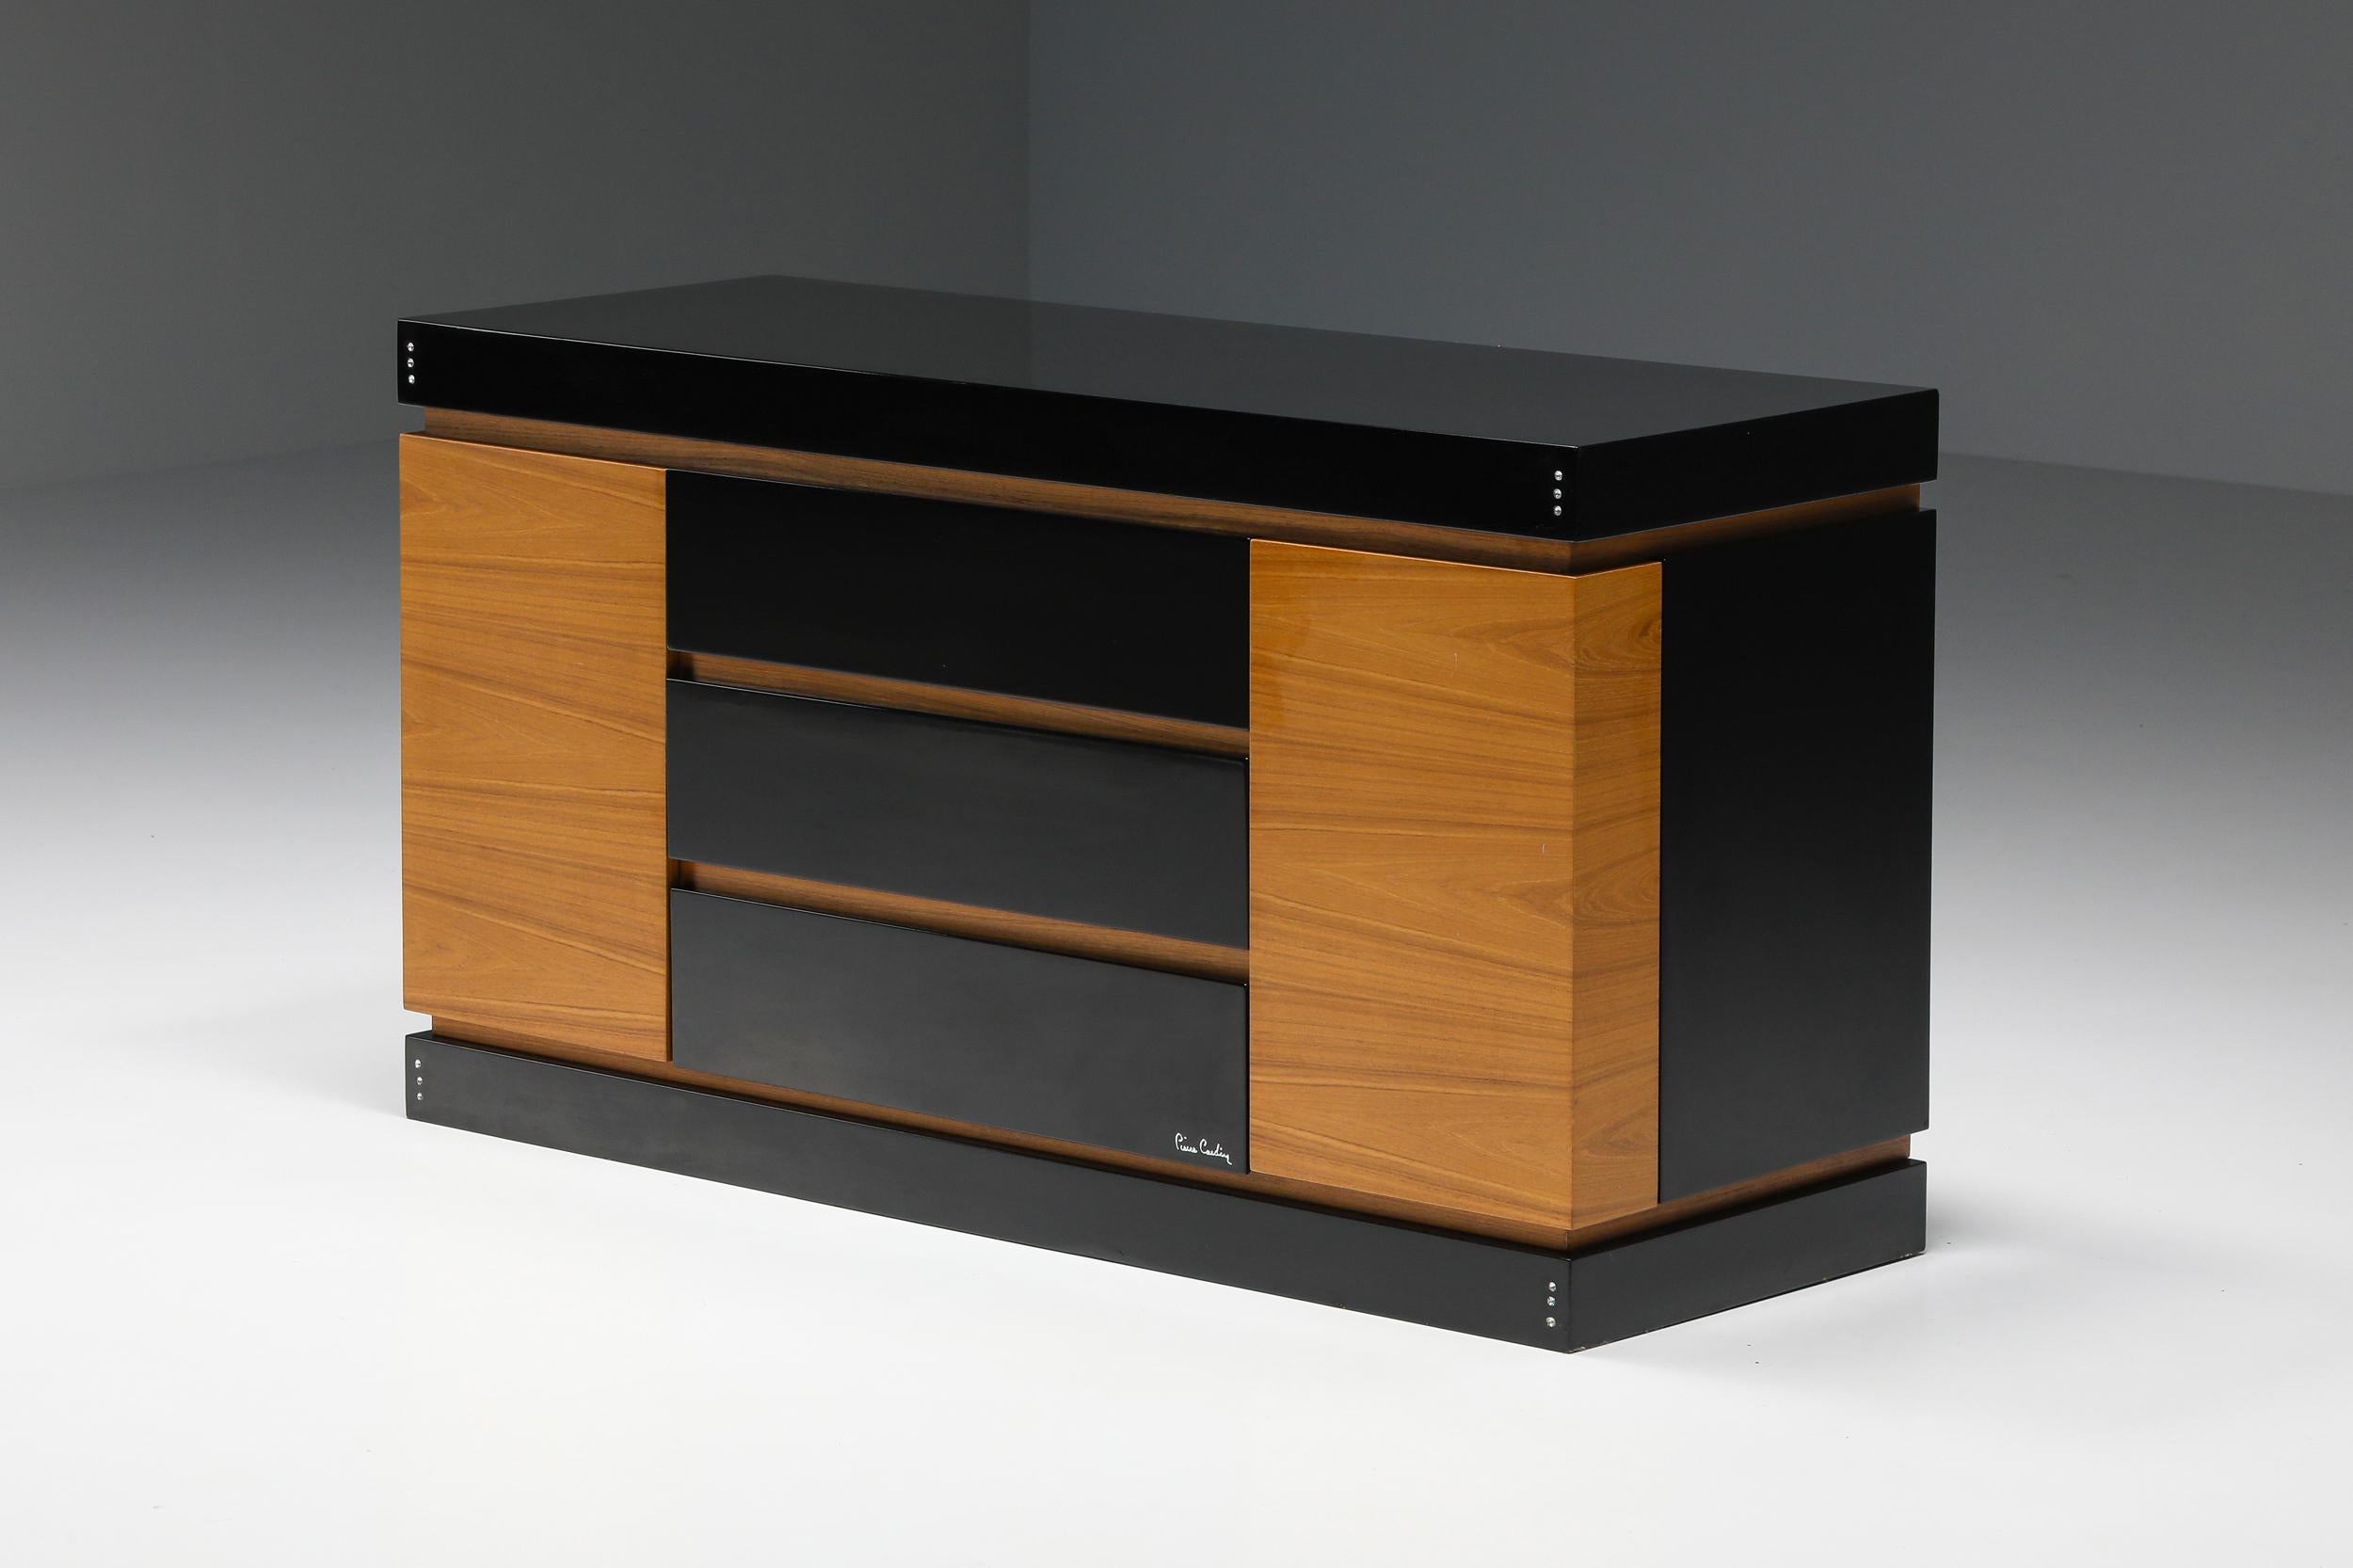 Pierre Cardin; French Design; Black lacquer; Teak drawer; Cabinet; Credenza;

Pierre Cardin sideboard in black lacquered wood and teak. This item is provided with two doors on each side and three large center drawers to provide maximum storage